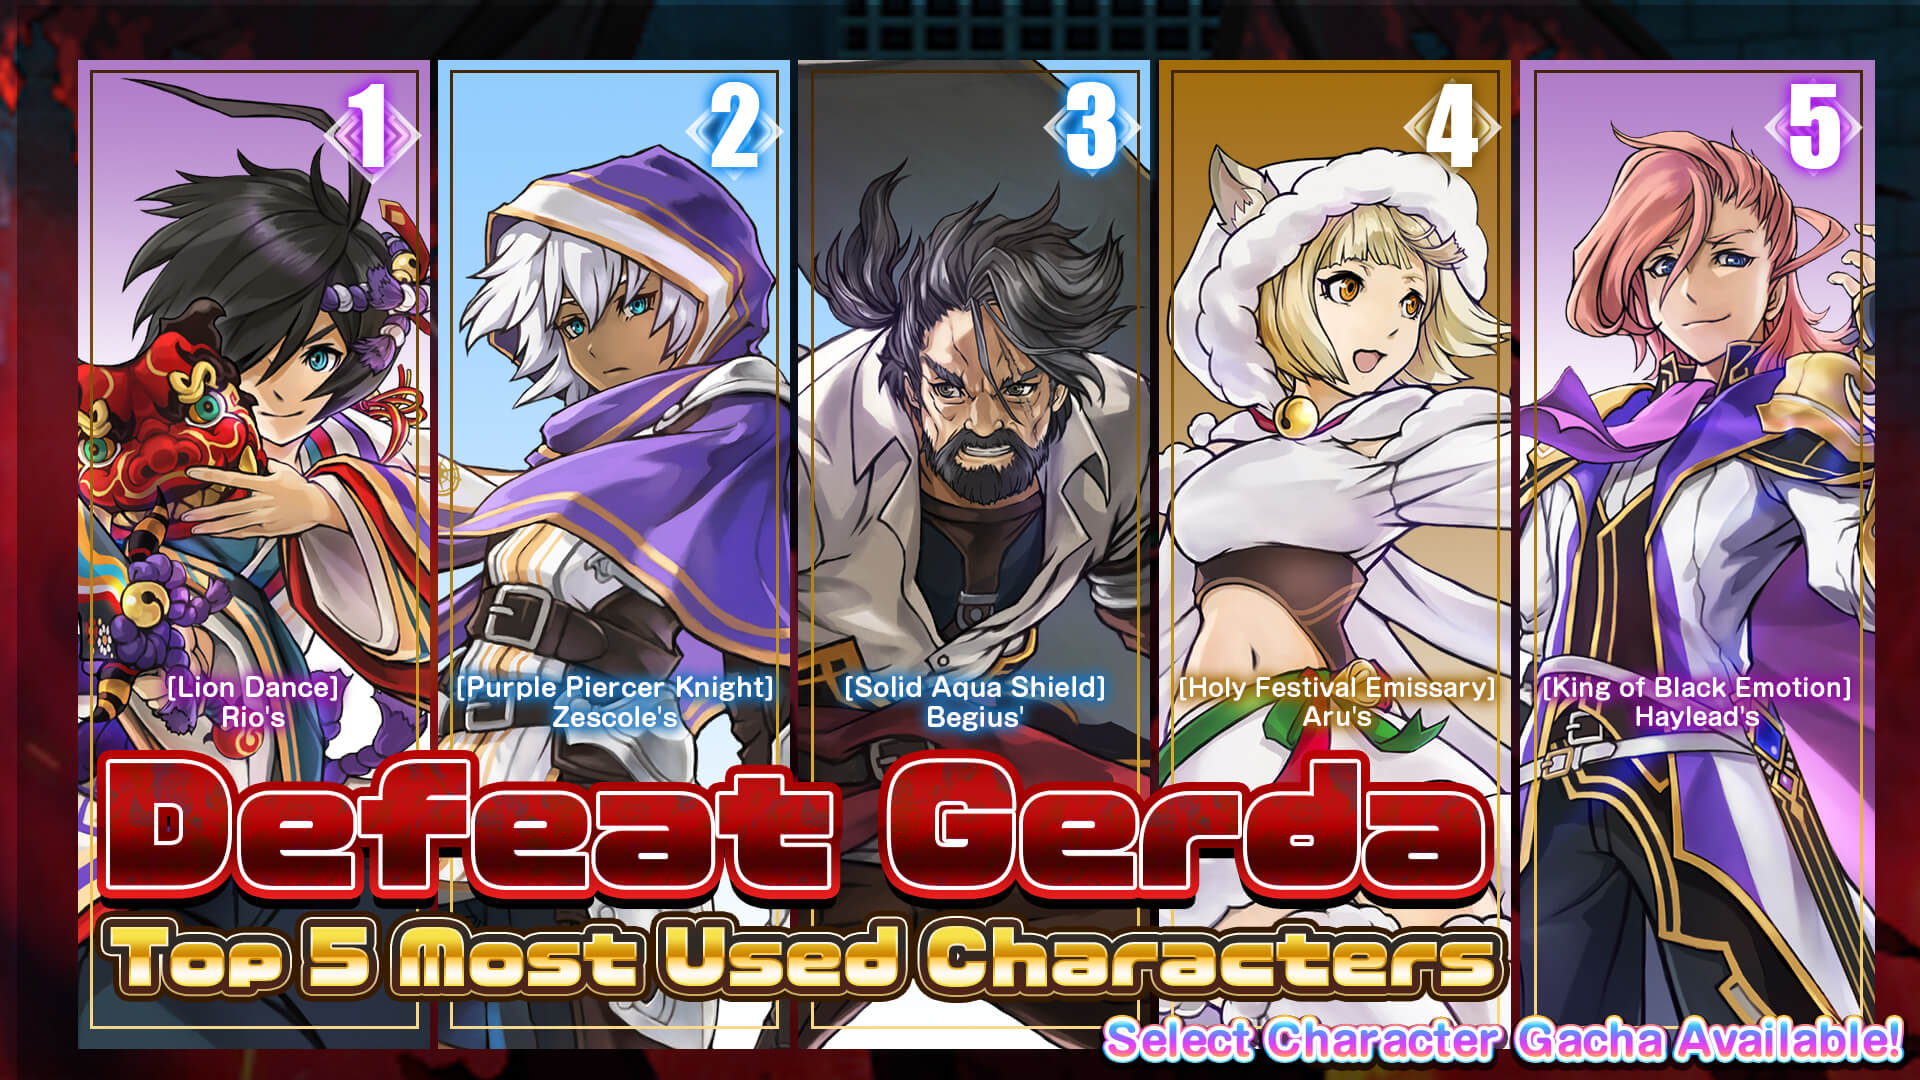 72 hours only! Select Gacha Containing the Top 5 Most Used Characters in "Defeat Gerda" Battle Available!